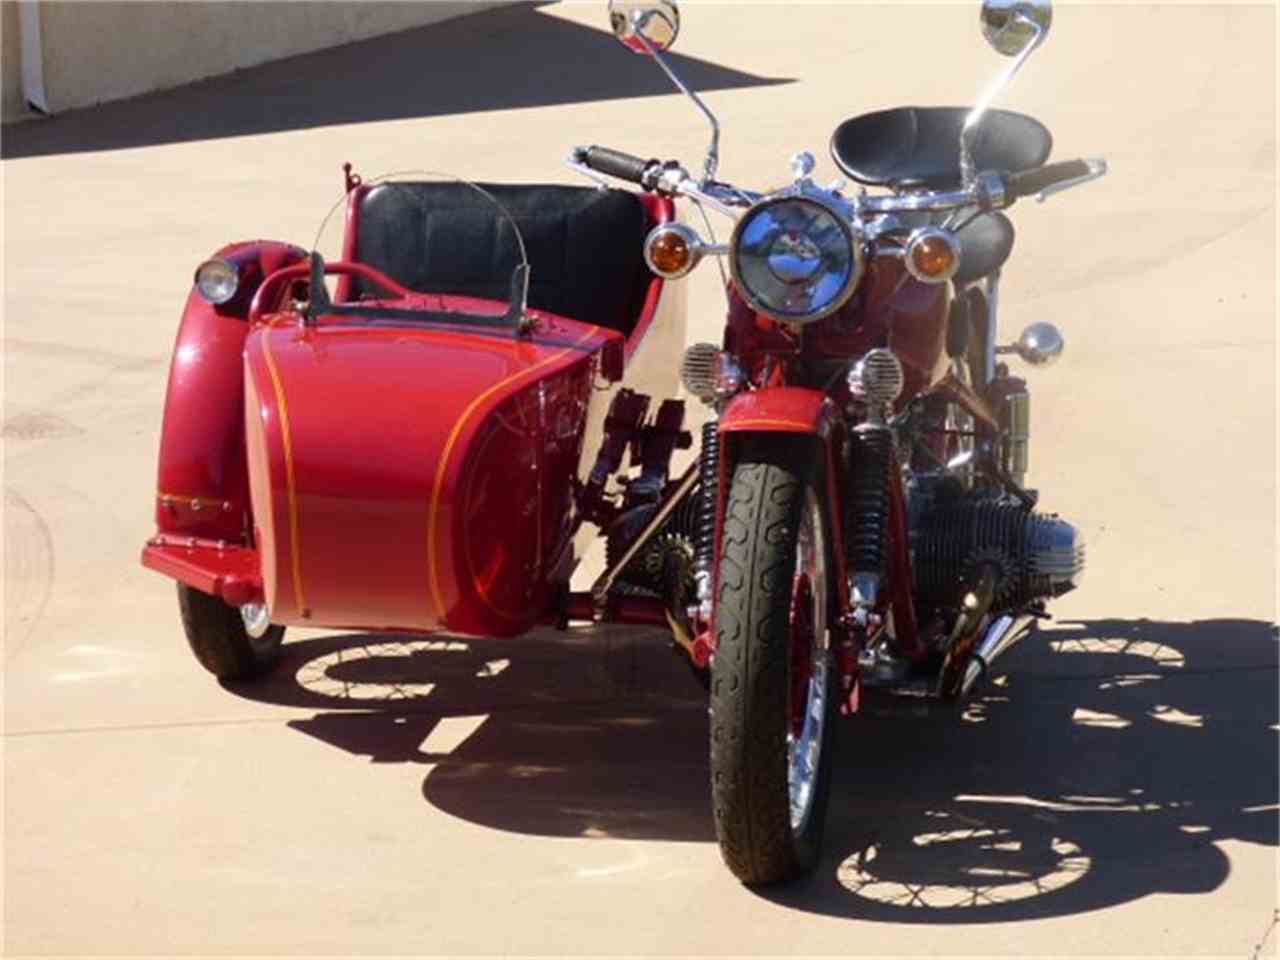 vintage motorcyles, Three-wheelers are popular, but vintage bikes with sidecars are cool, ClassicCars.com Journal